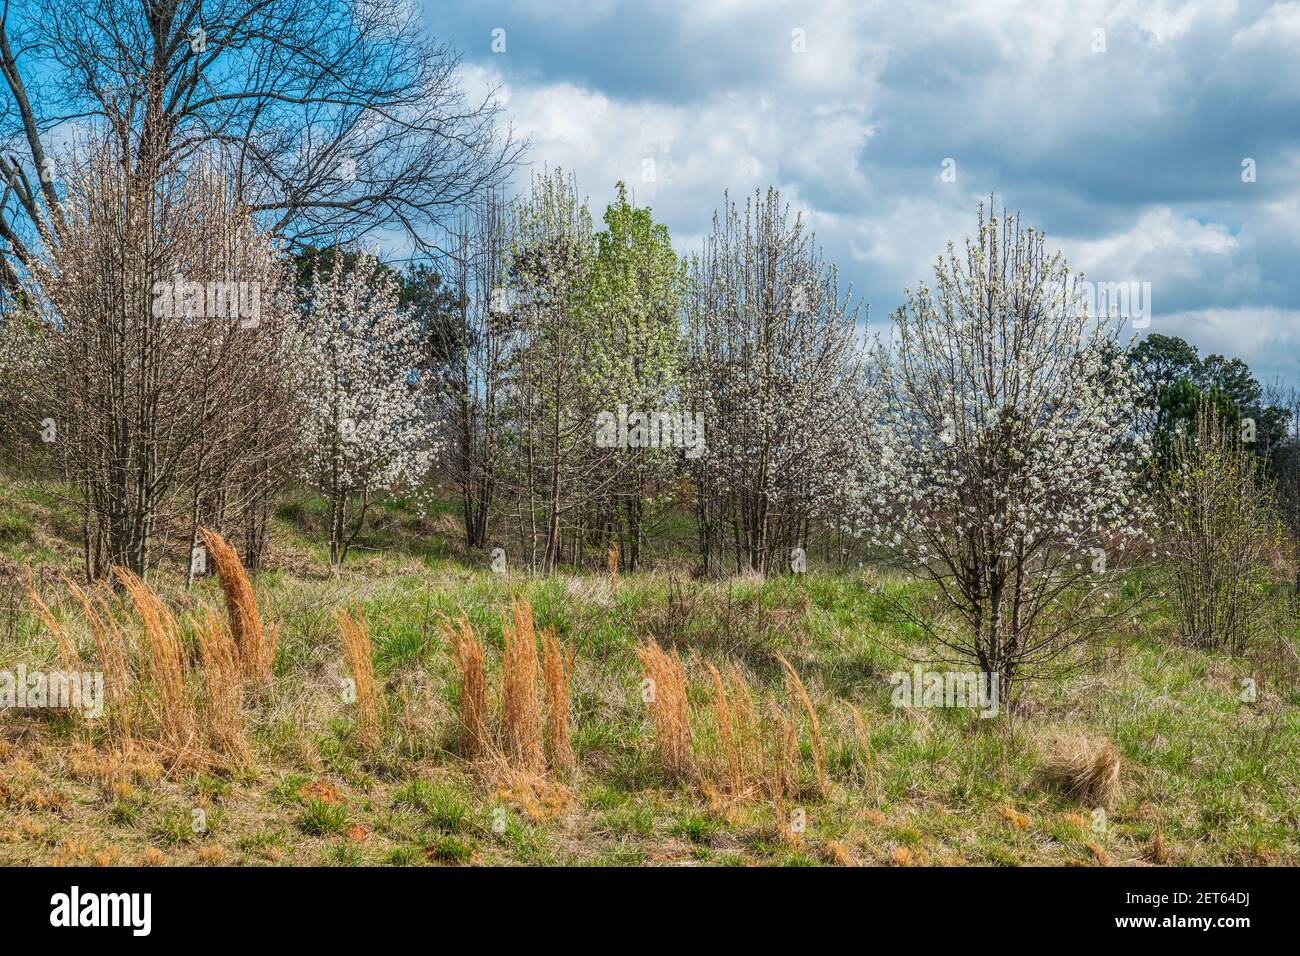 An open field of tall grasses and bright white flowering trees some with newly foliage in early spring on a sunny day with clouds Stock Photo